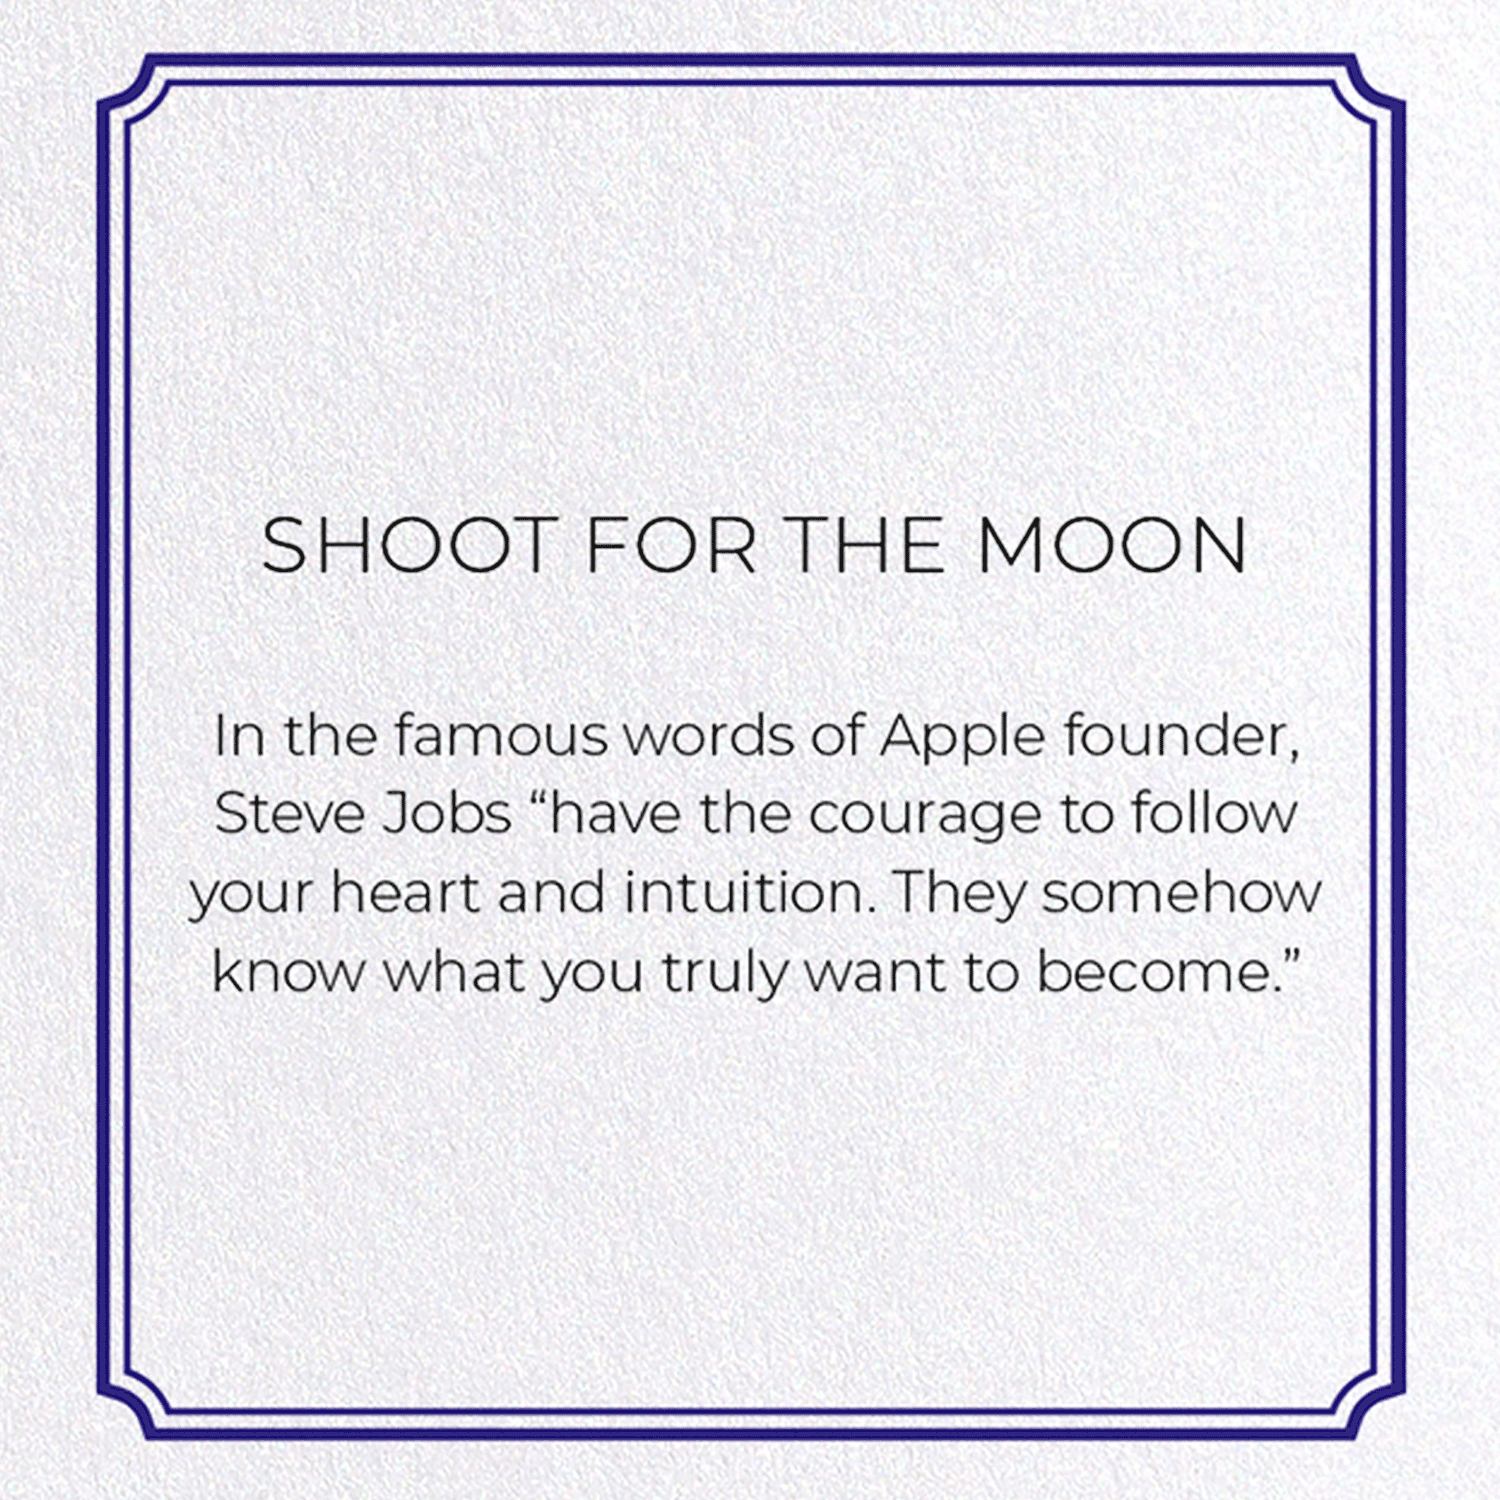 SHOOT FOR THE MOON: Vintage Greeting Card